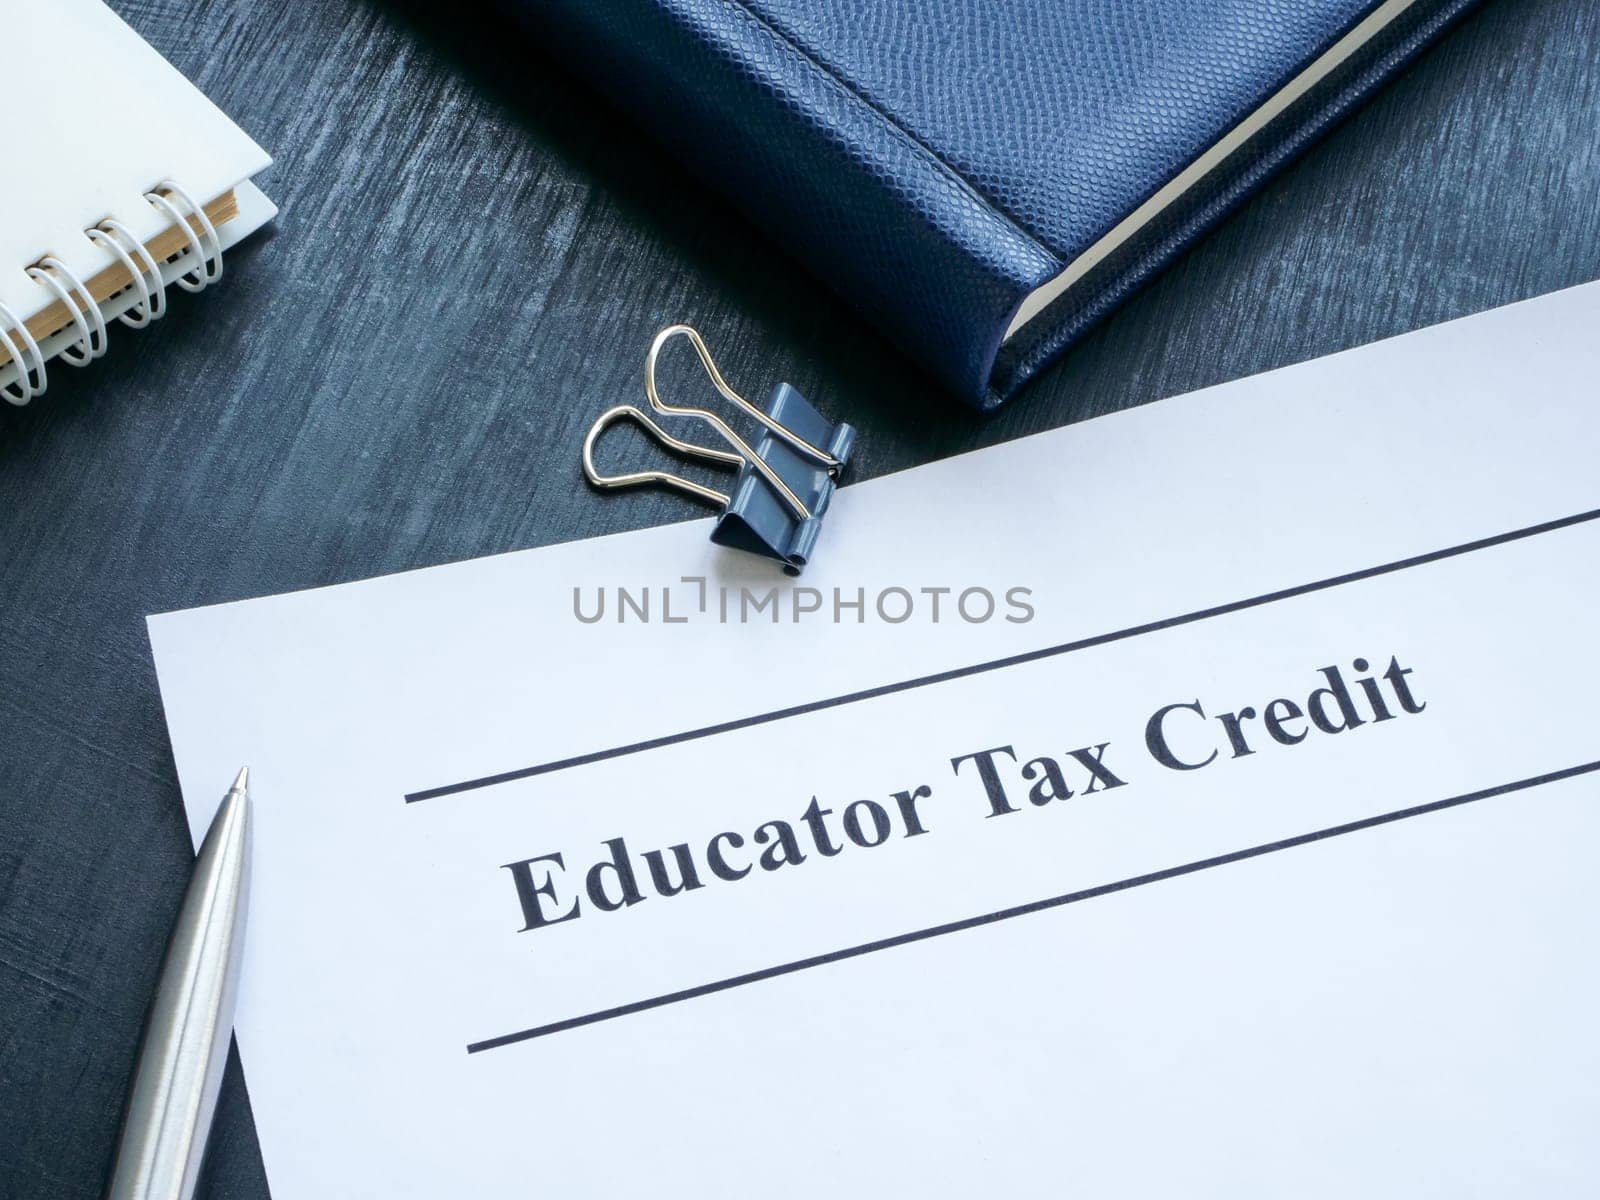 Papers about Educator tax credit on the desk. by designer491